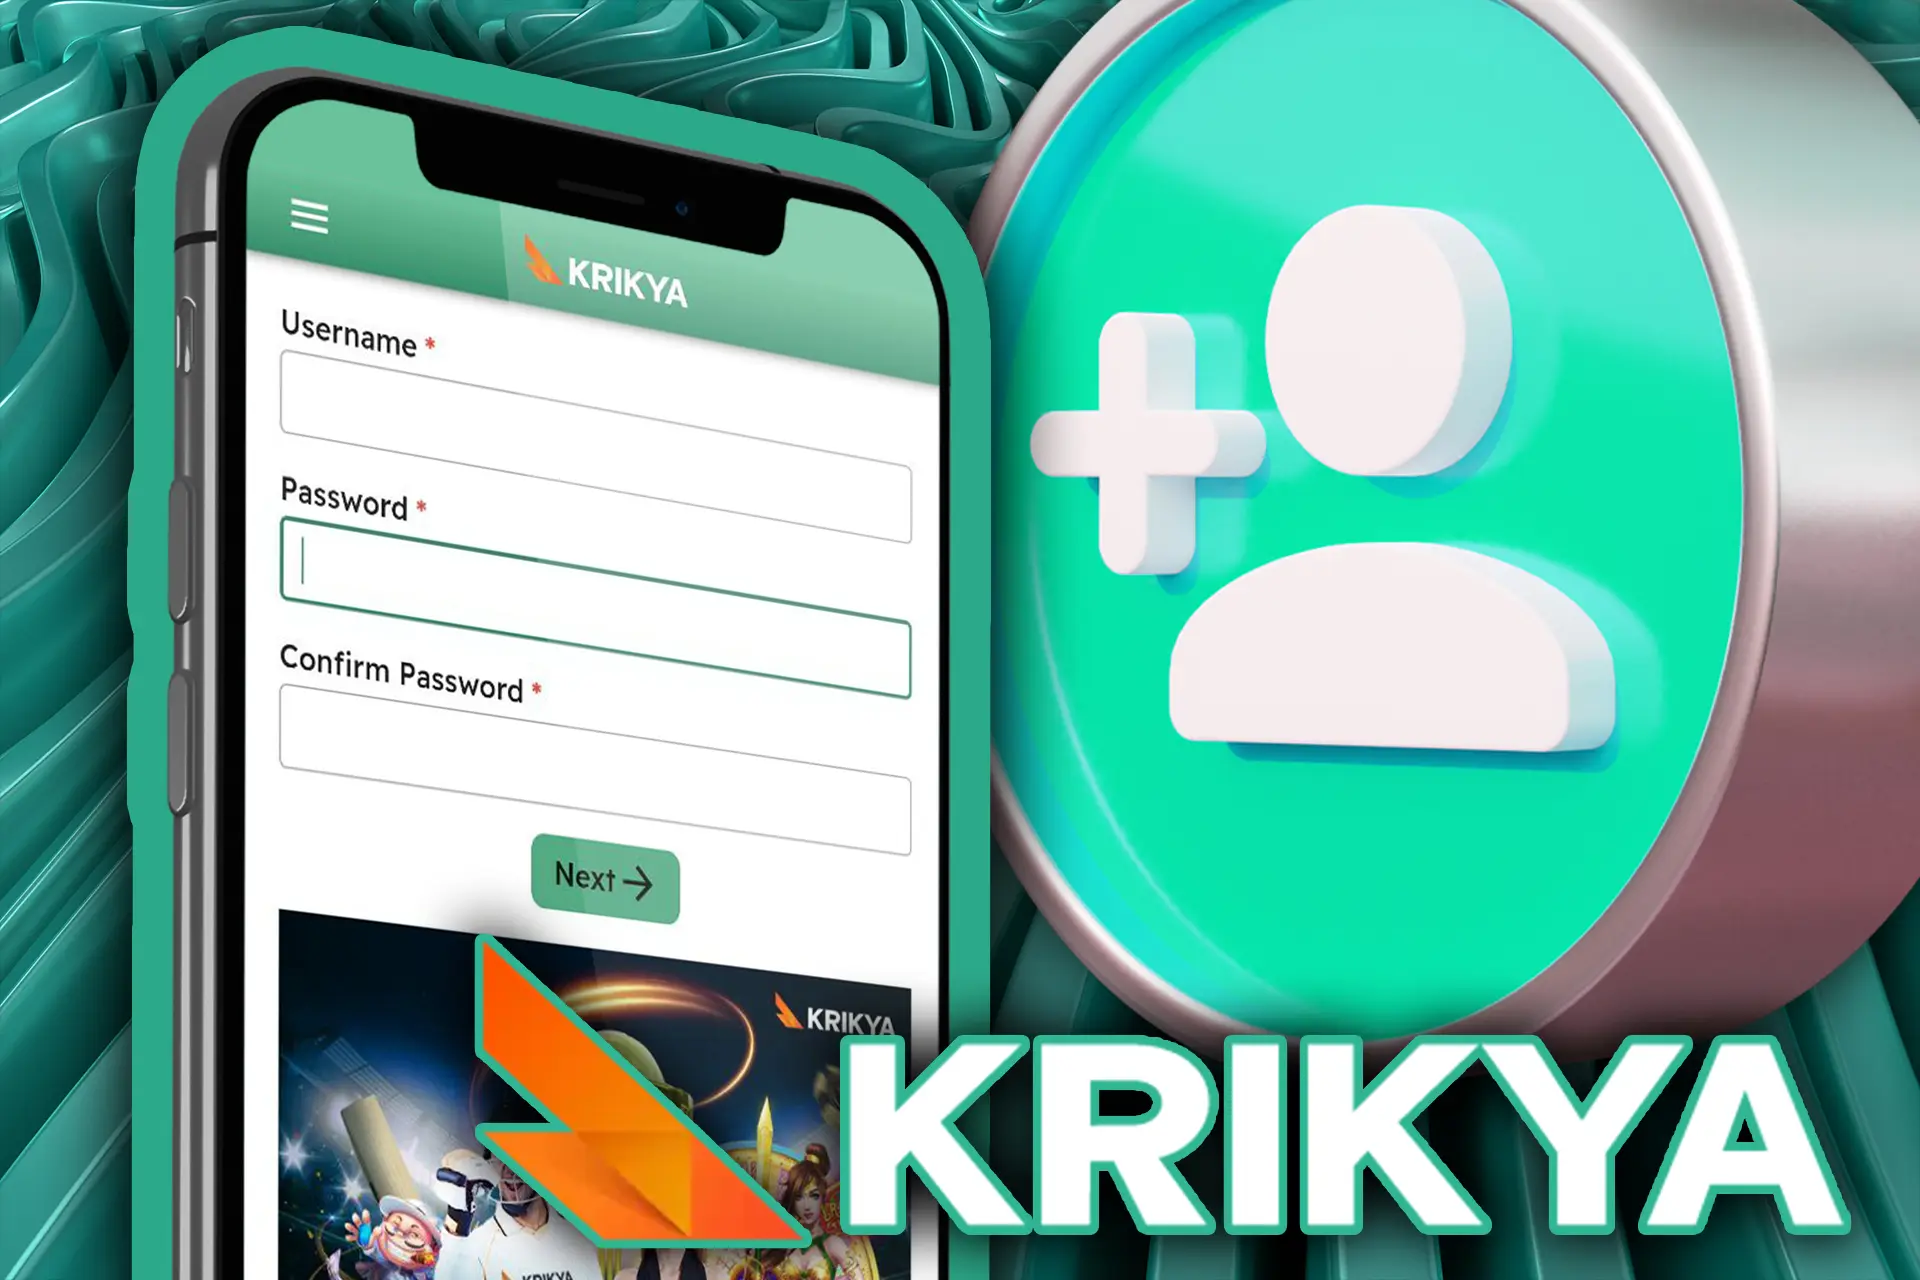 You can sign up for Krikya via the app too.